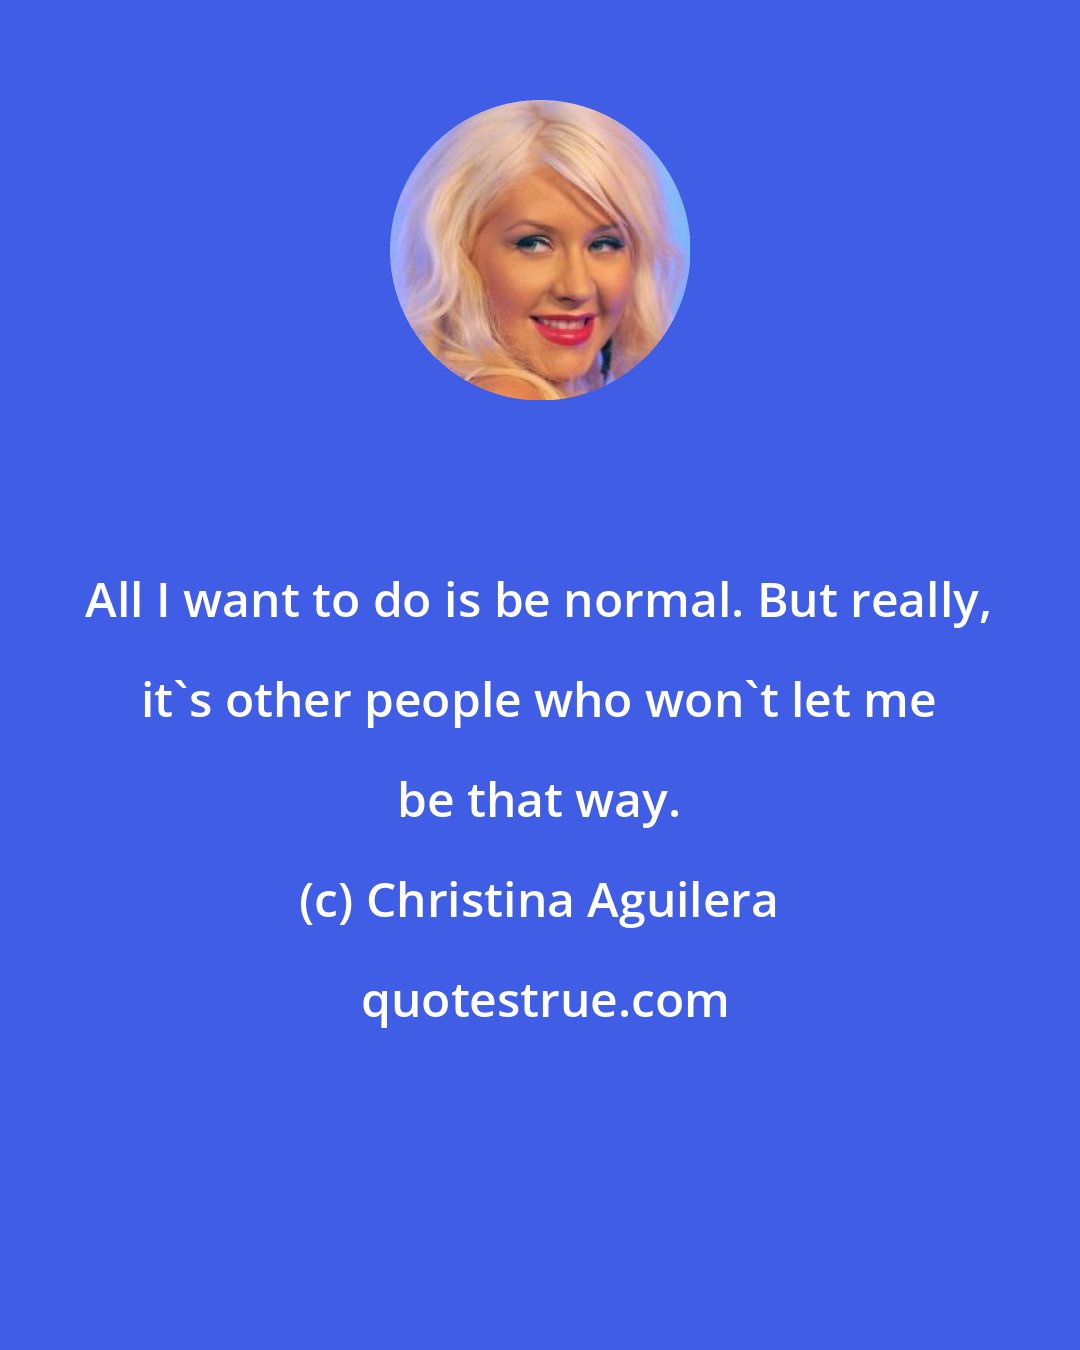 Christina Aguilera: All I want to do is be normal. But really, it's other people who won't let me be that way.